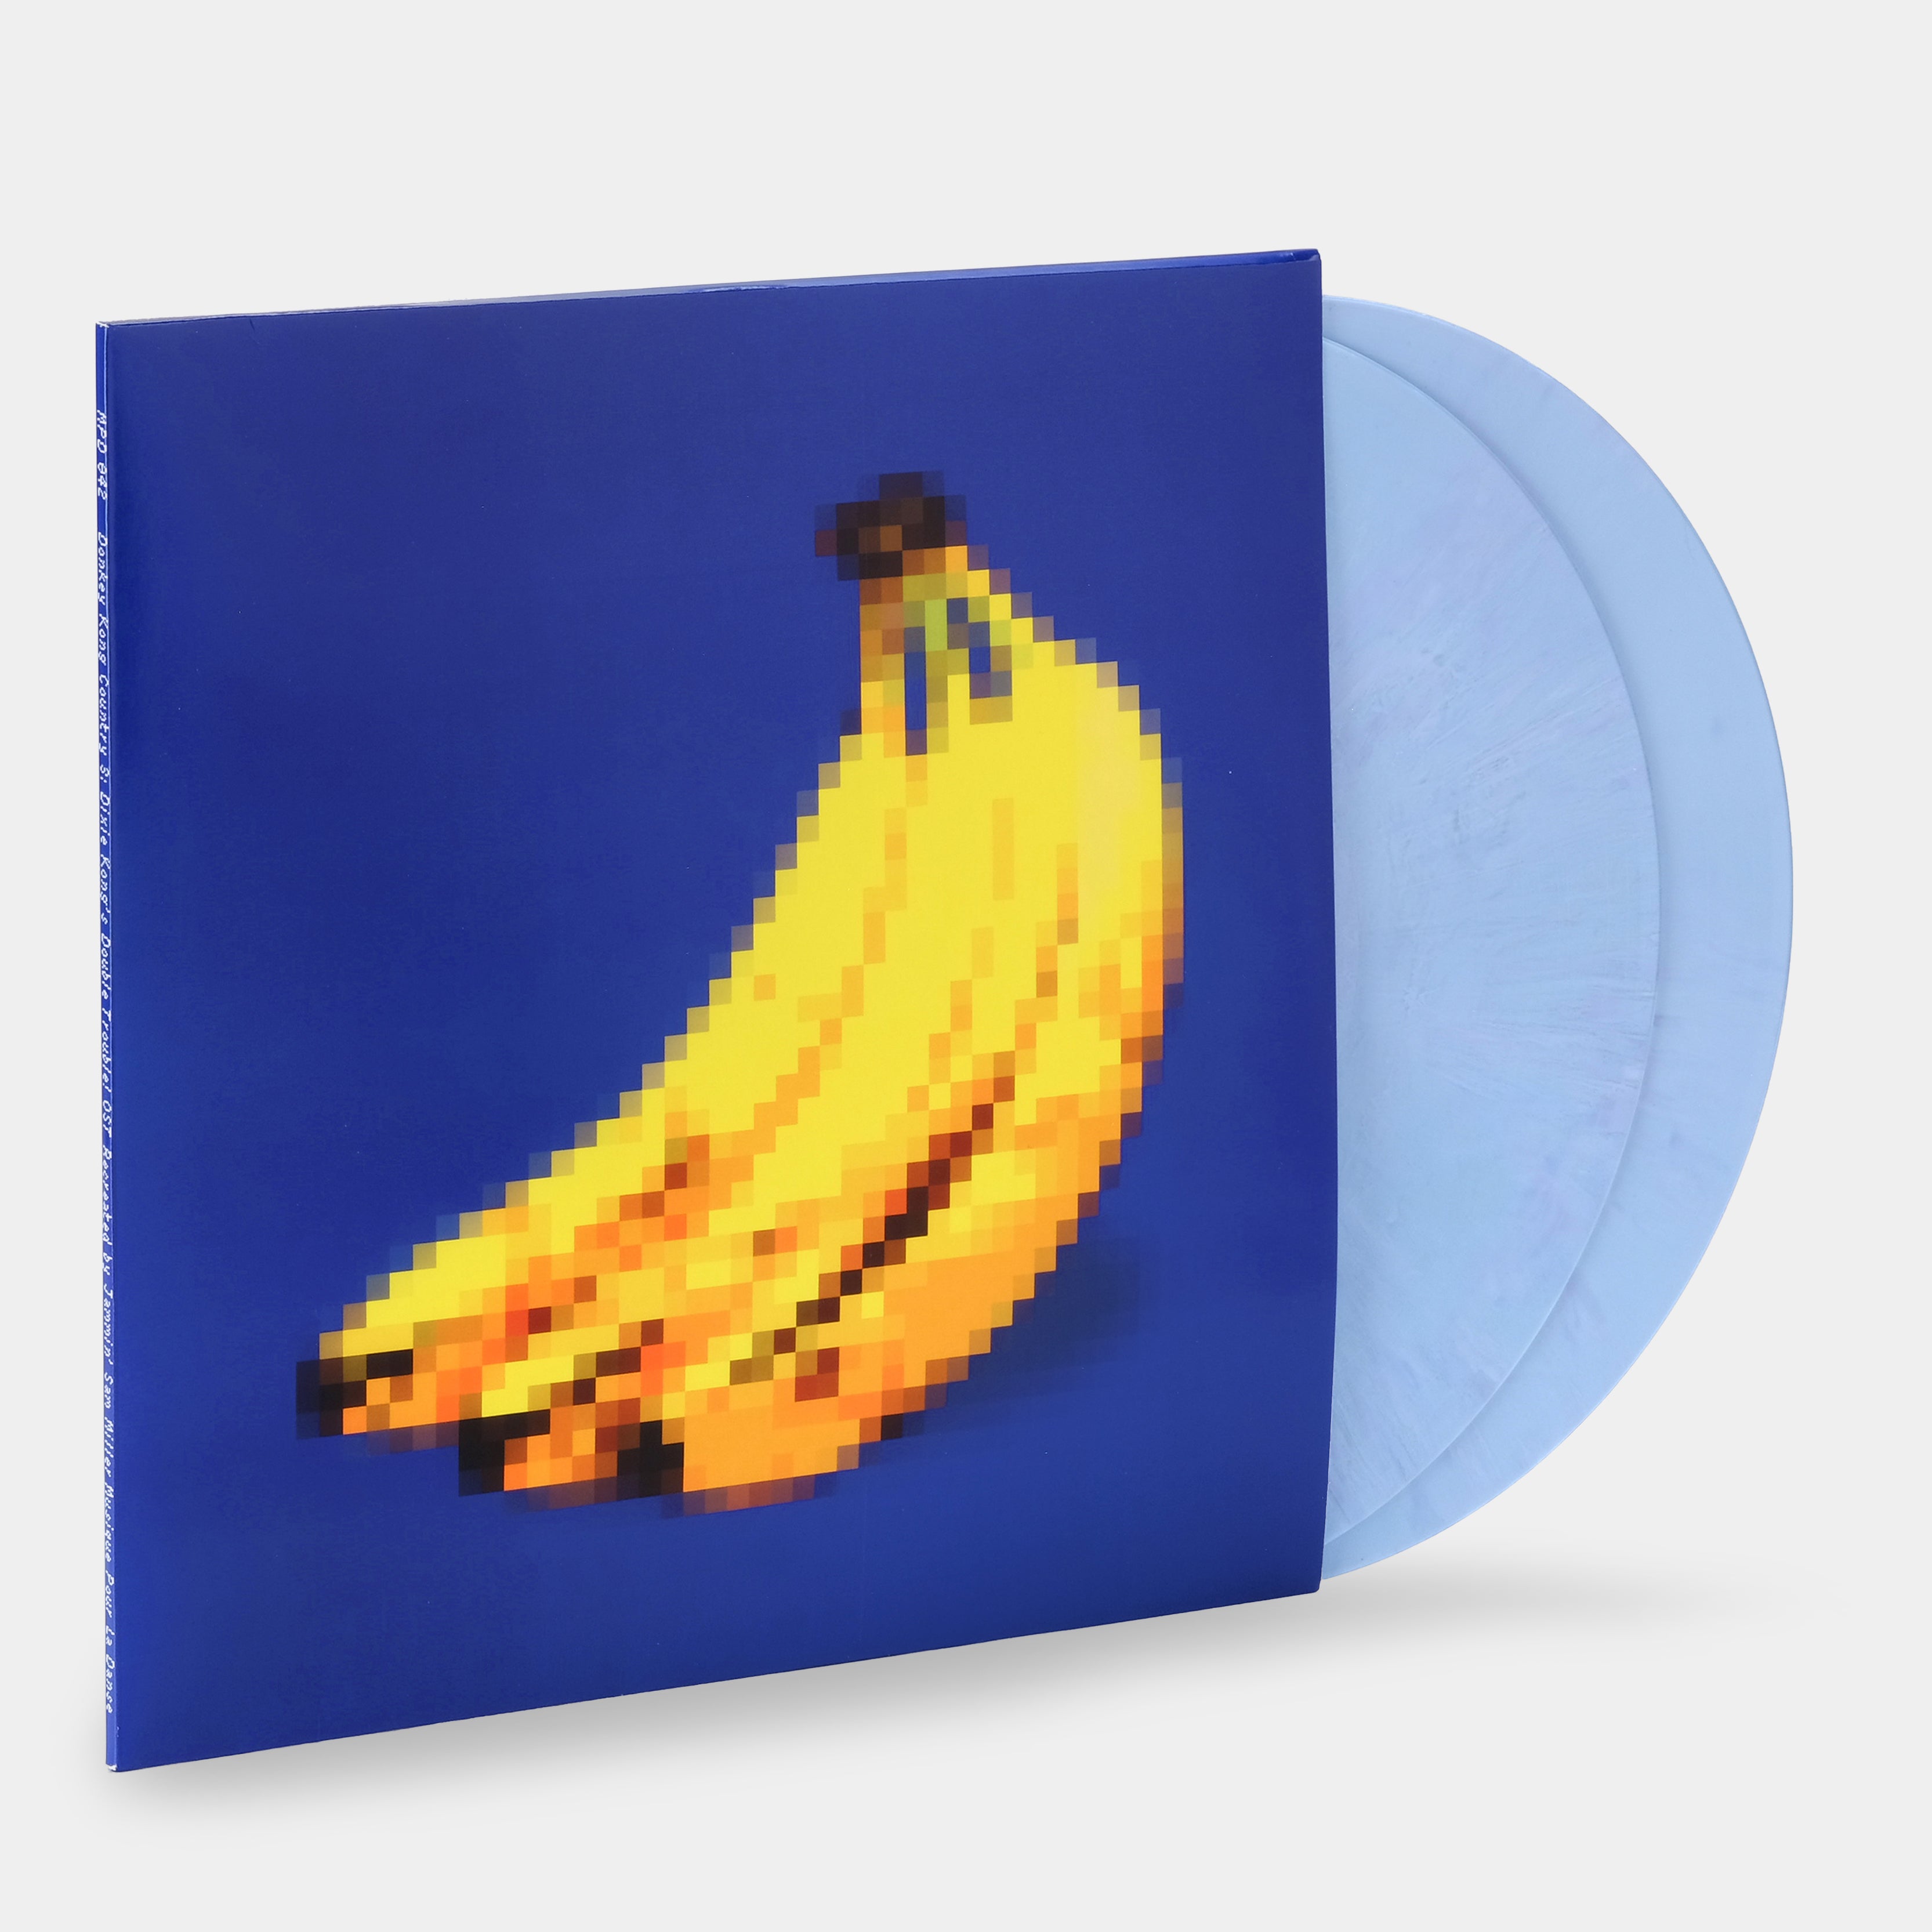 Jammin' Sam Miller – Donkey Kong Country 3: Dixie Kong's Double Trouble OST Recreated 2xLP Blue Marble Vinyl Record